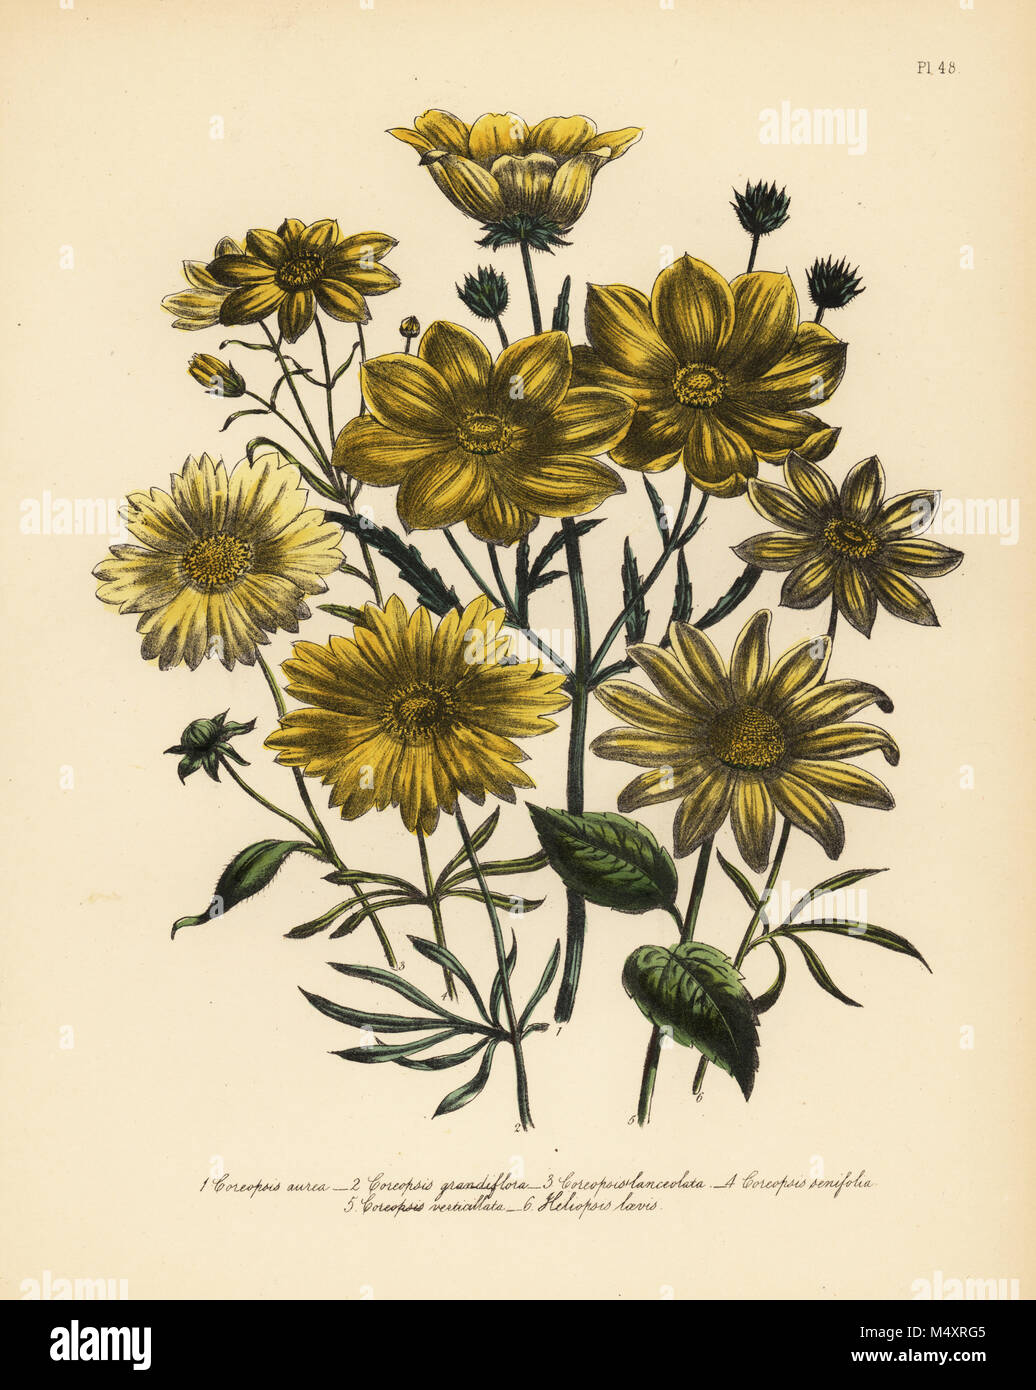 Golden coreopsis, Coreopsis aurea, large-flowered coreopsis, C. grandiflora, lanceolate-leaved coreopsis, C. lanceolata, six-leaved coreopsis, C. senifolia, whorl-leaved coreopsis, C. verticillata, and smooth-leaved heliopsis, Heliopsis laevis. Handfinished chromolithograph by Henry Noel Humphreys after an illustration by Jane Loudon from Mrs. Jane Loudon's Ladies Flower Garden of Ornamental Perennials, William S. Orr, London, 1849. Stock Photo